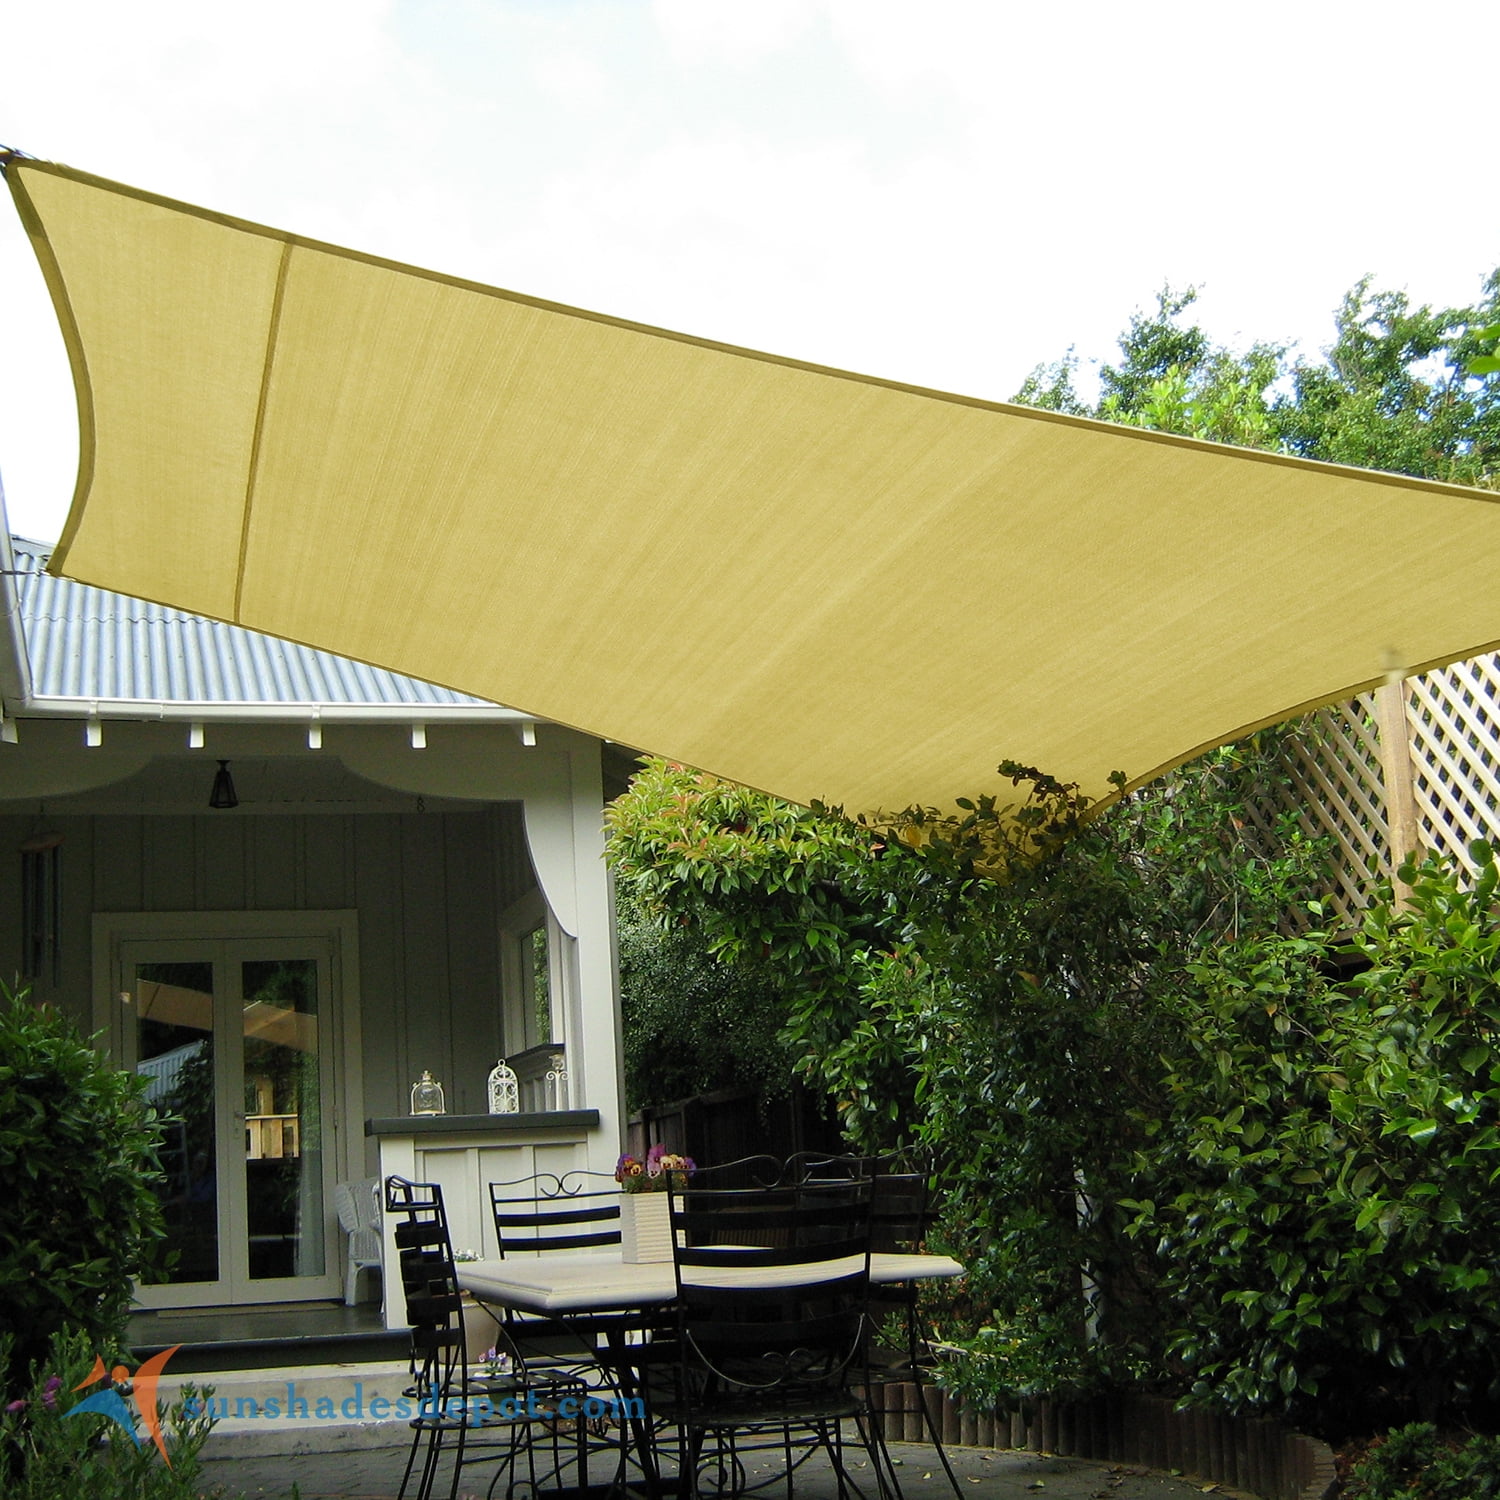 Sunshades Depot 10' x 18' Rectanlge Waterproof Knitted Shade Sail Curved  Edge Yellow 180 GSM UV Block Shade Fabric Pergola Carport Canopy  Replacement 